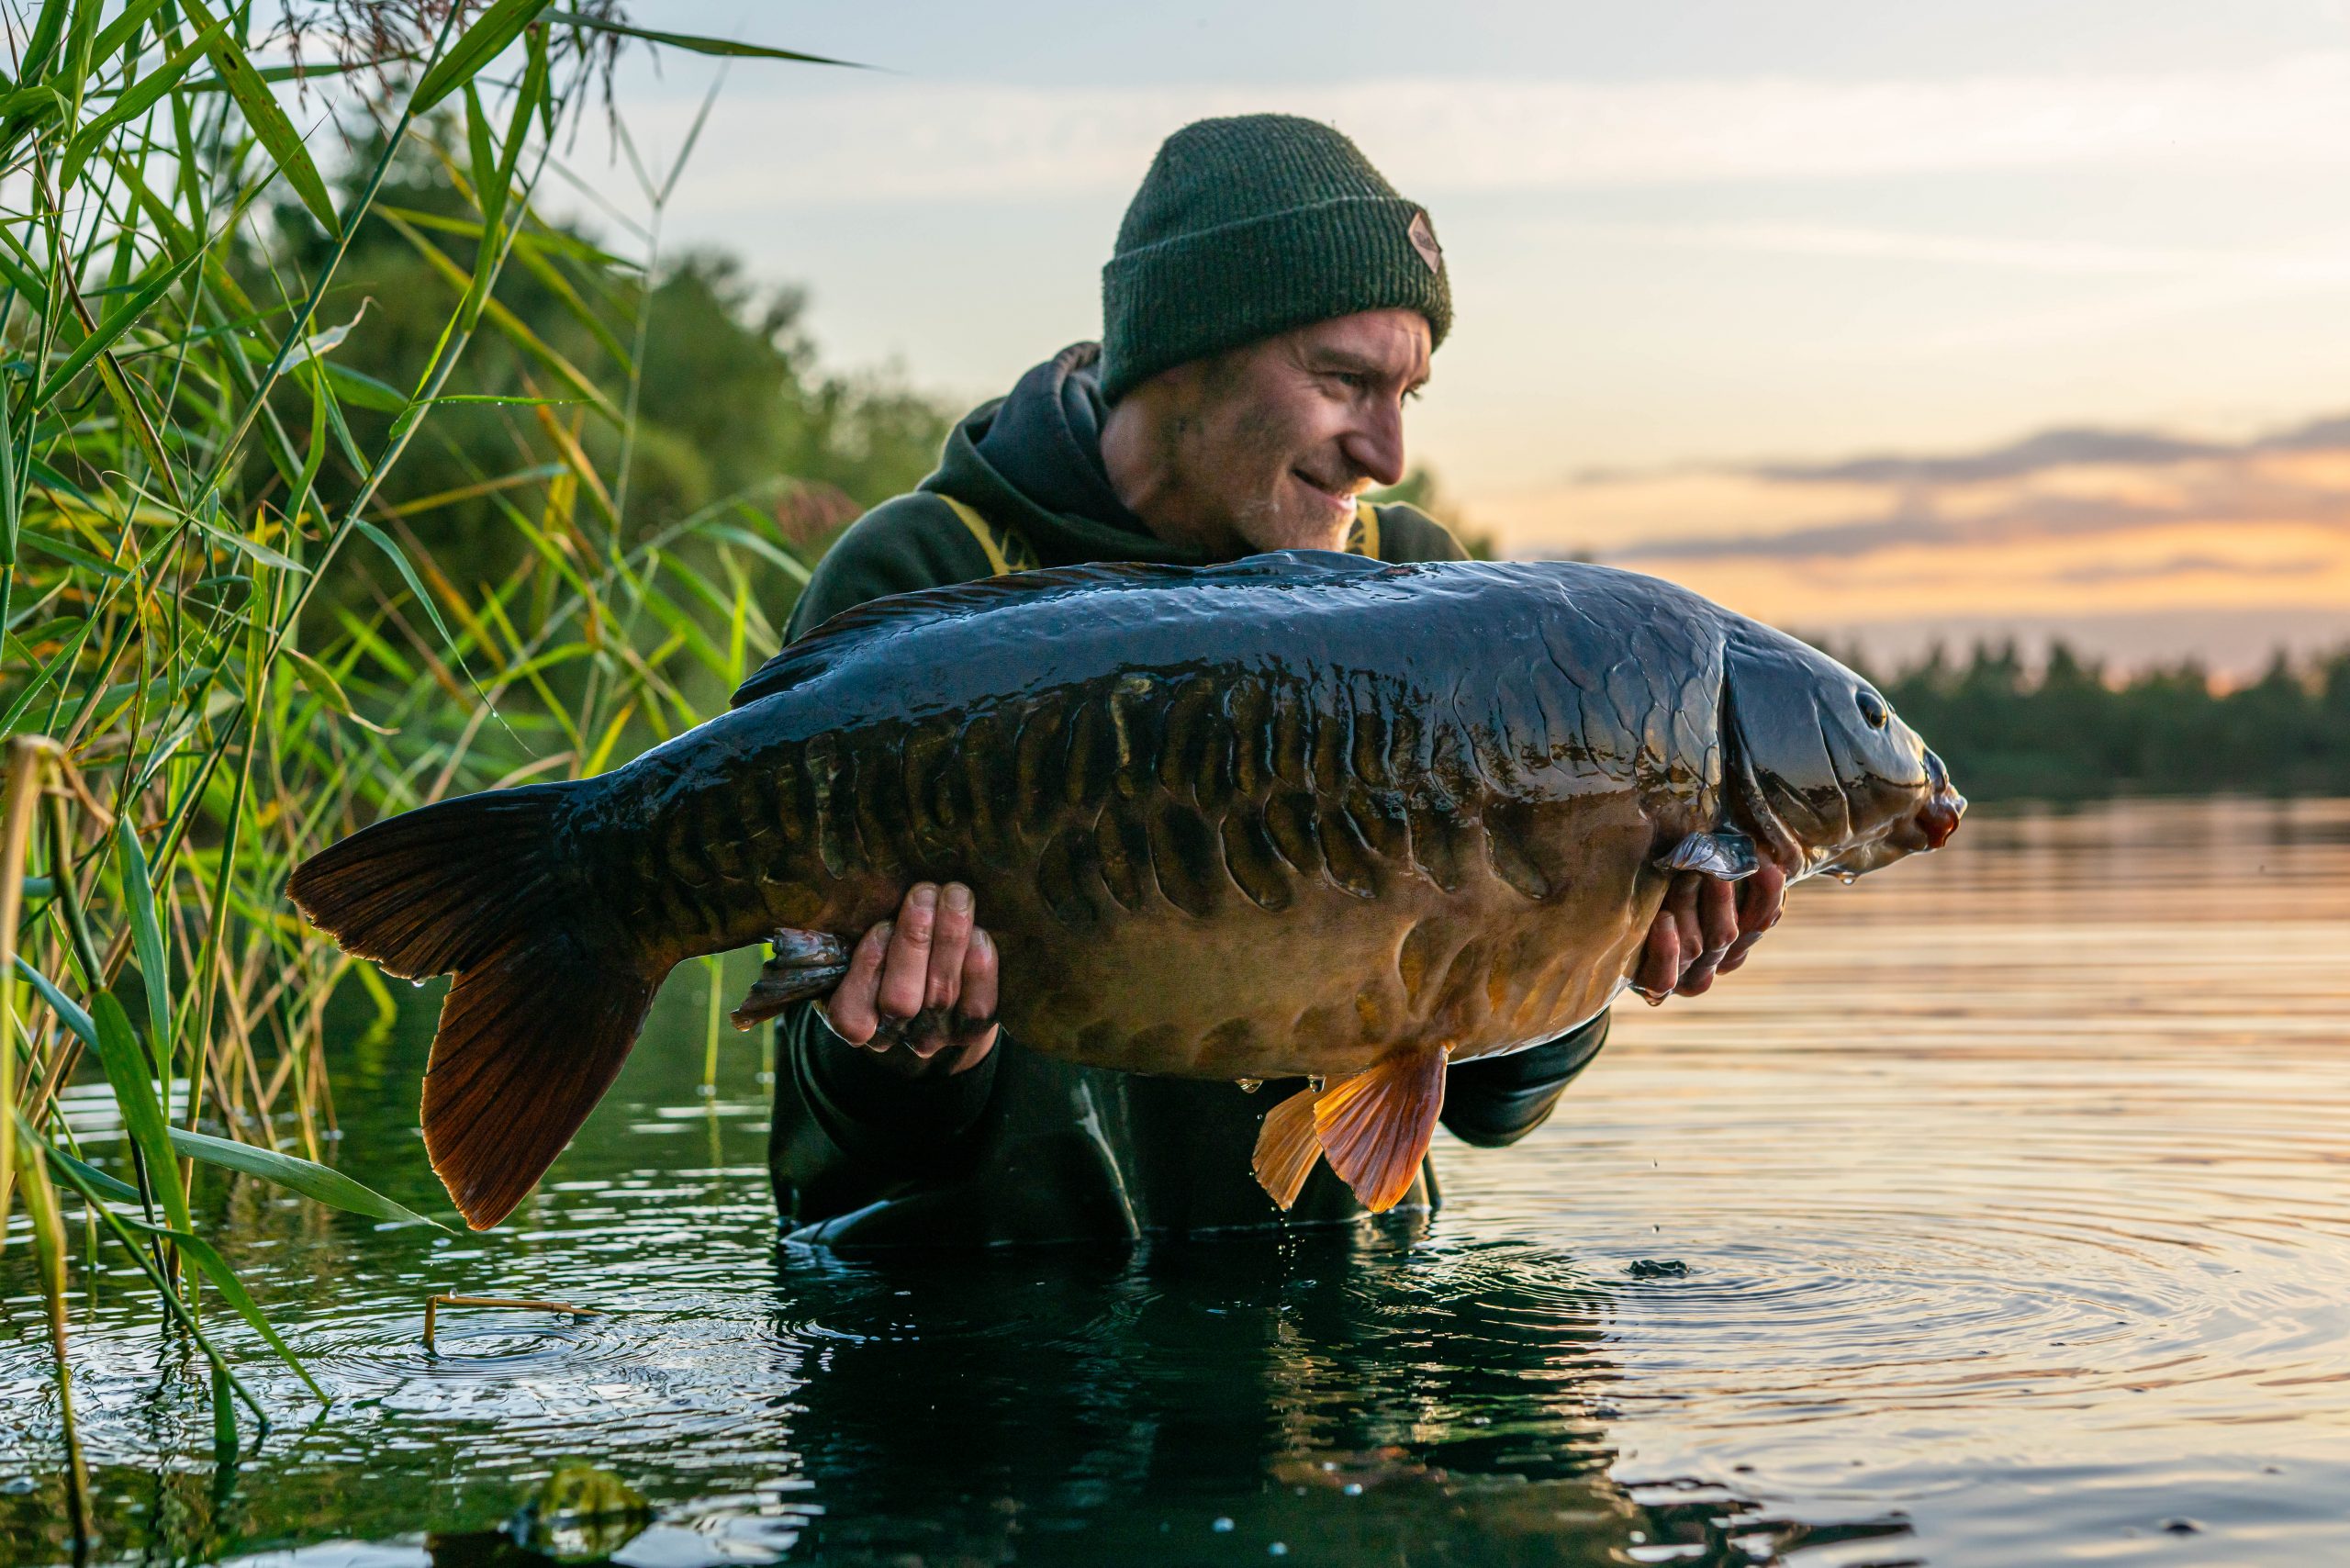 Angling Direct reels in strong online sales during lockdown